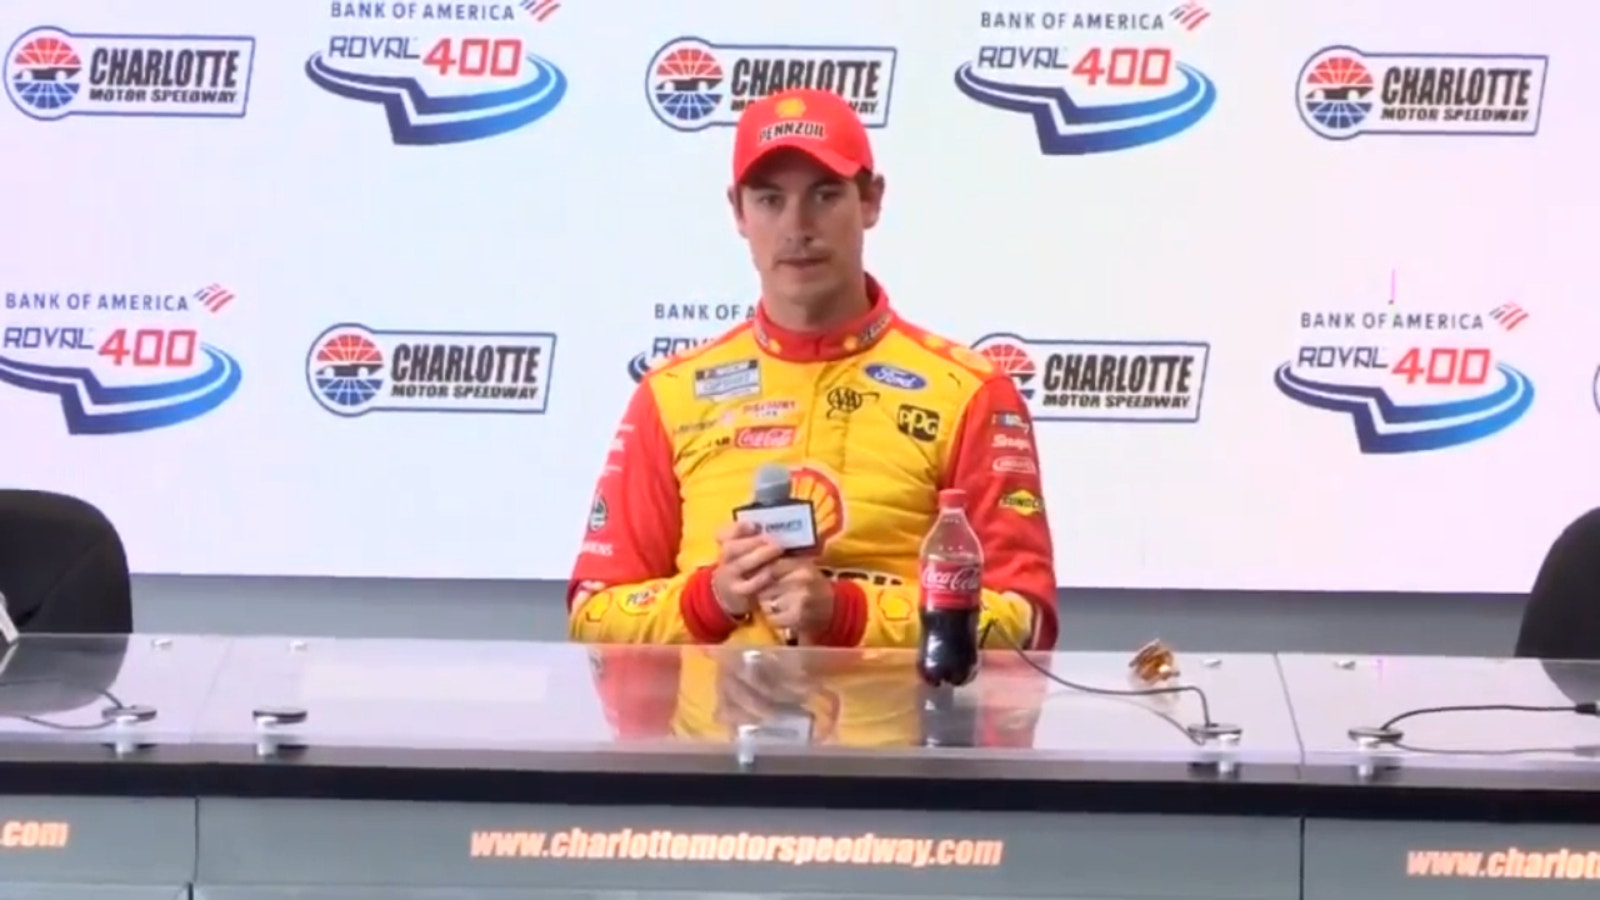 Joey Logano feels better after meeting with NASCAR